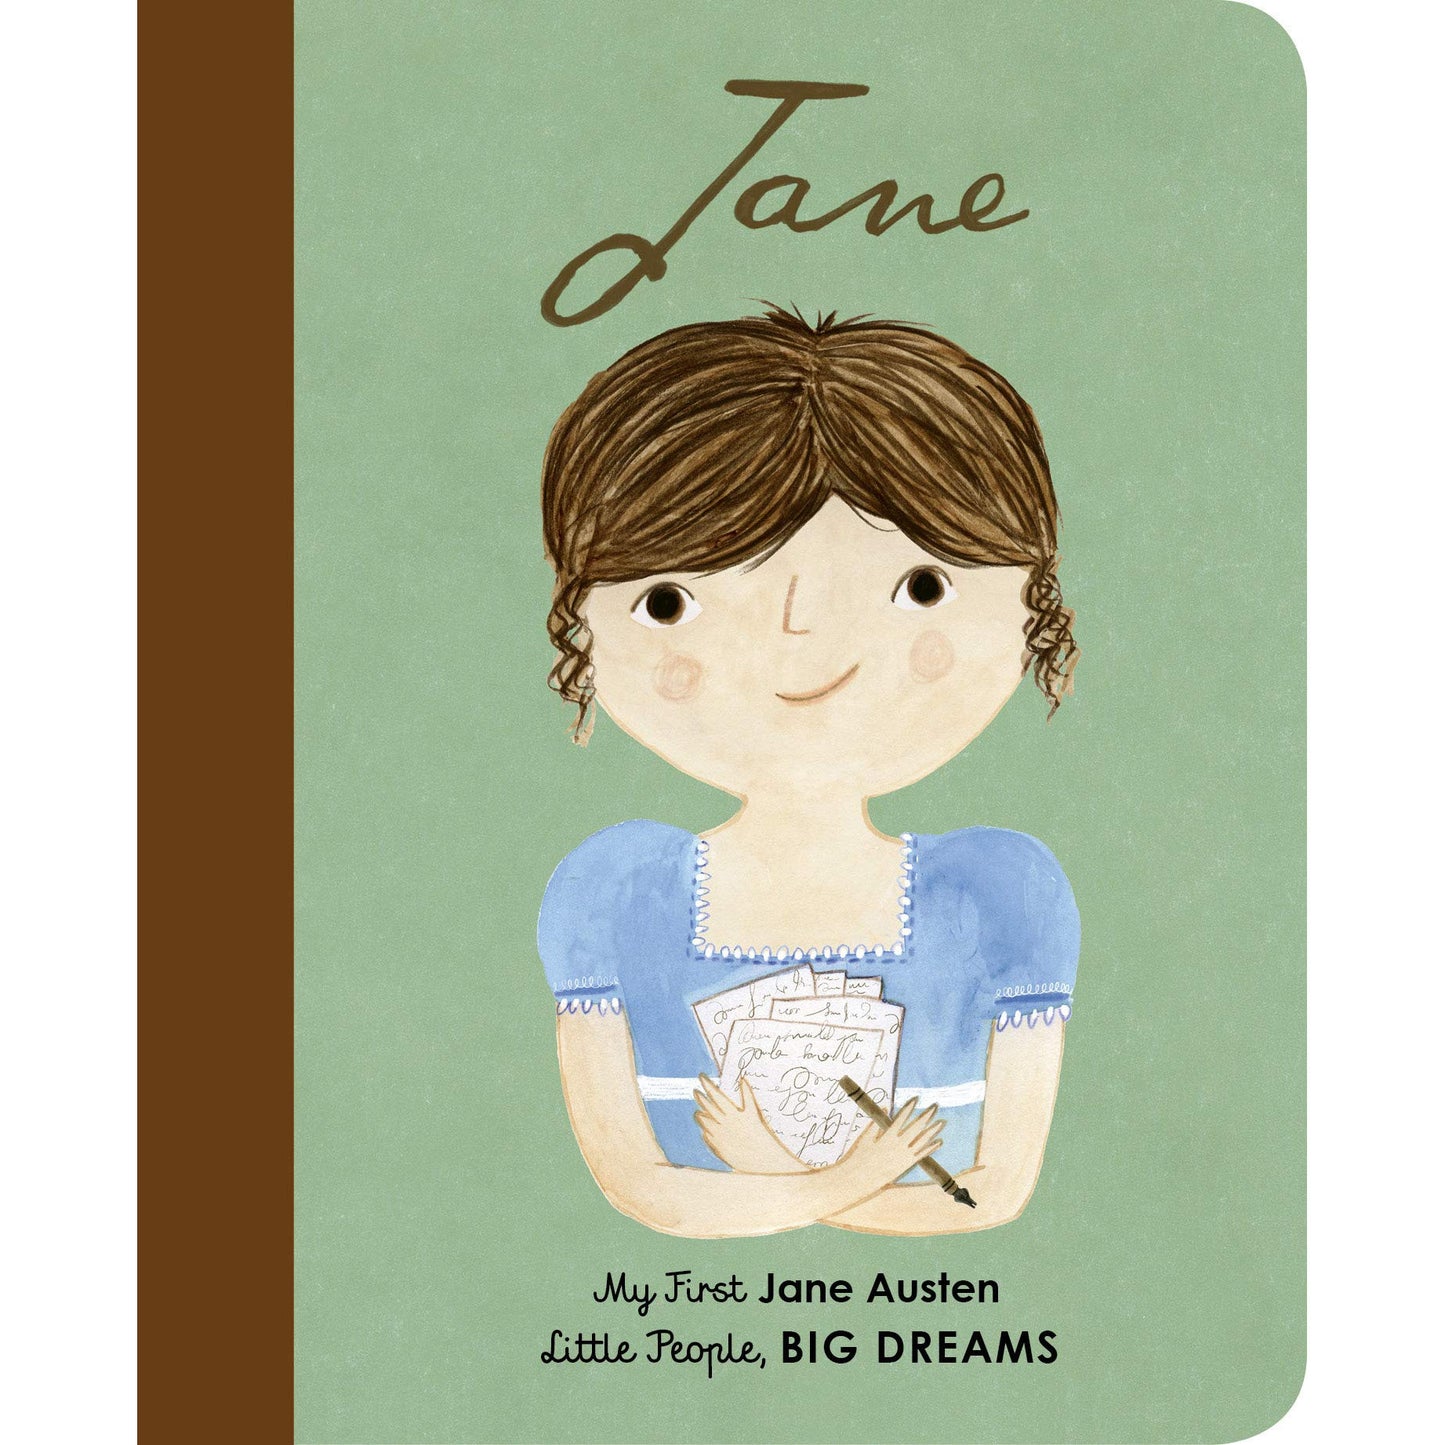 Jane Austen - My First Little People BIG DREAMS - Muddy Boots Home UK